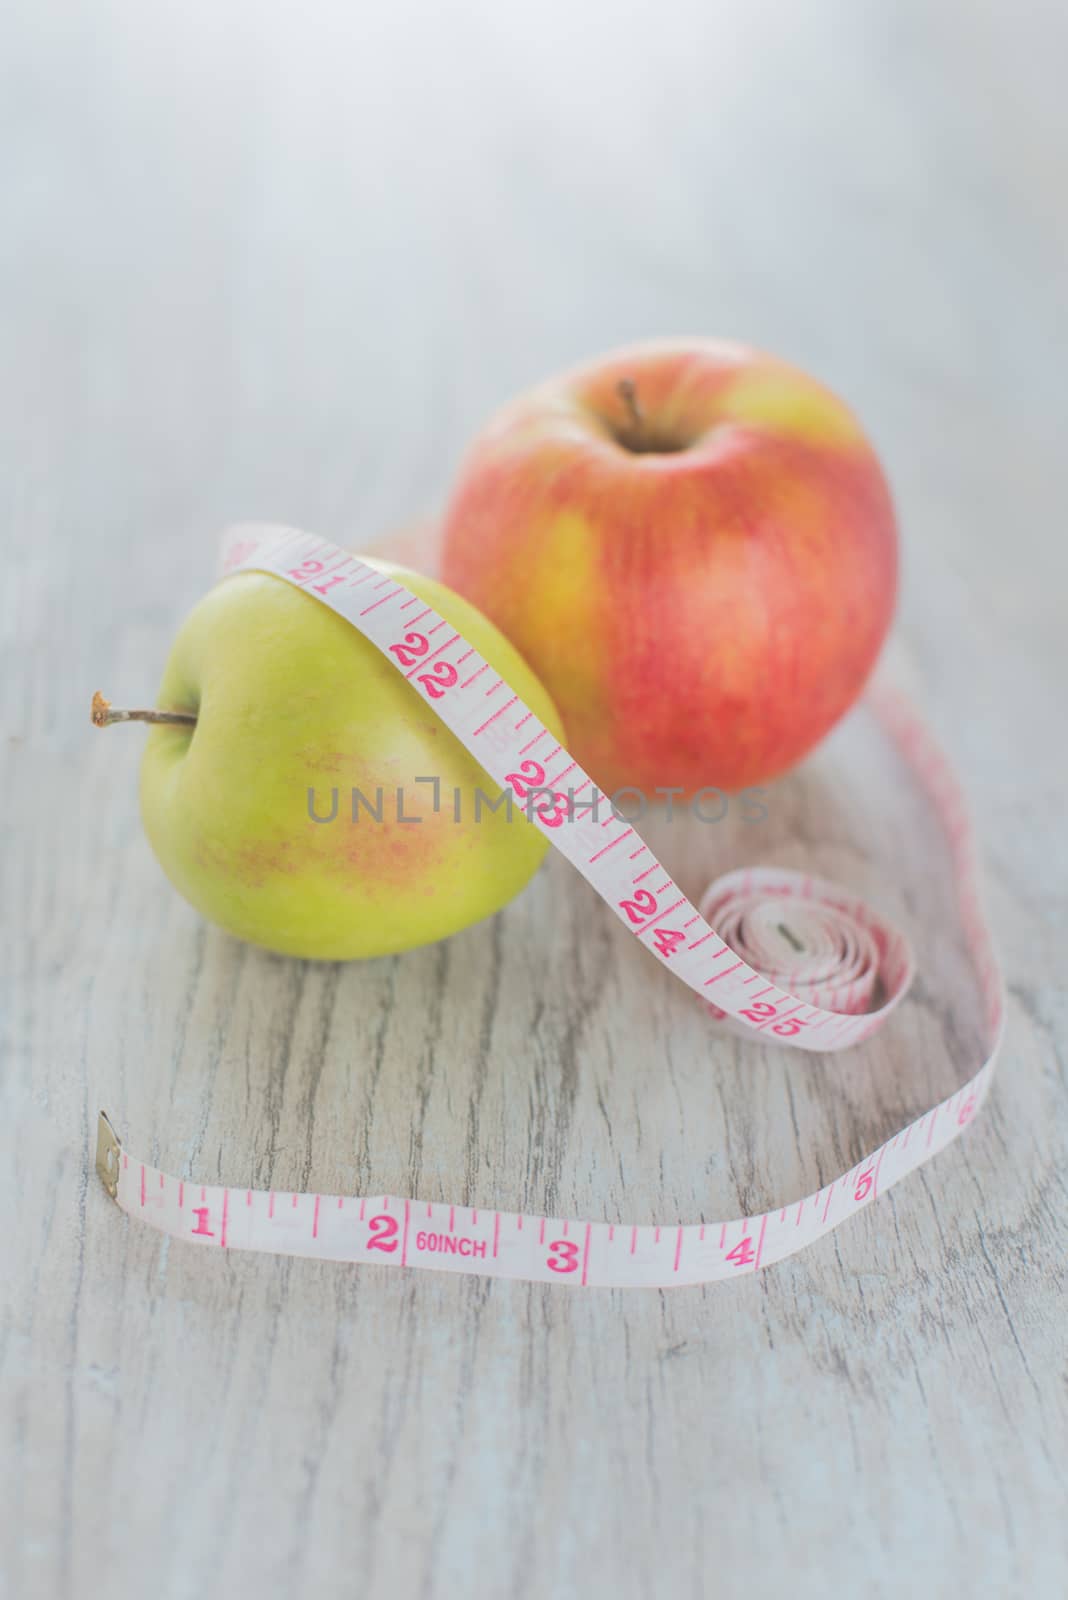 Apples in the measuring tape by Linaga